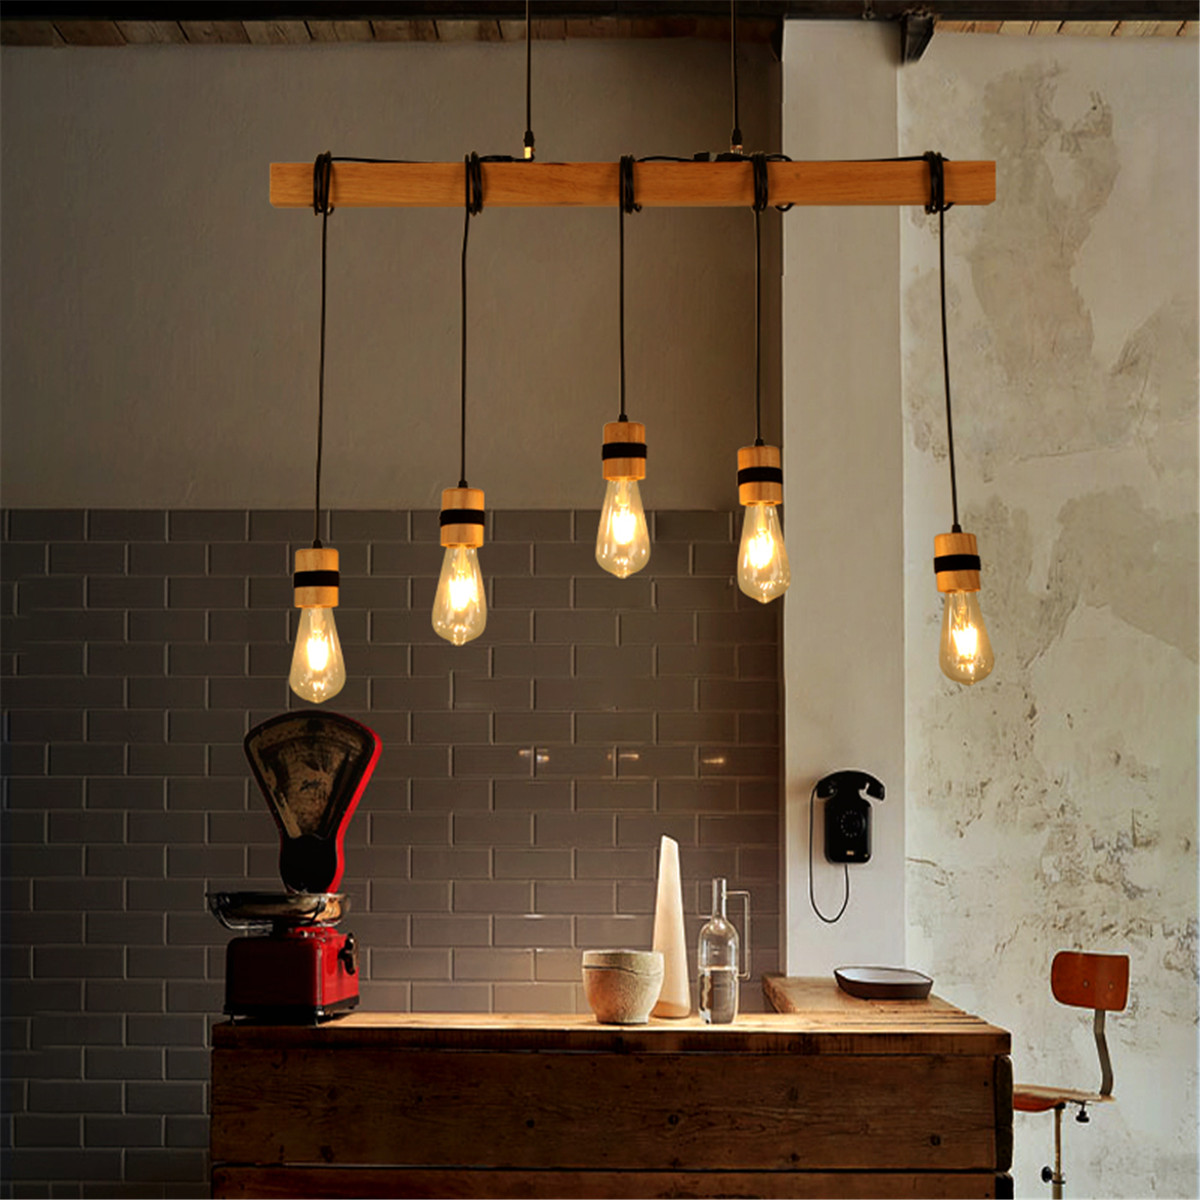 AC85-265V-Industrial-Wooden-E27-Pendant-Light-Ceiling-Lamp-Chandeliers-Lighting-Fixtures-Without-Bul-1815131-7